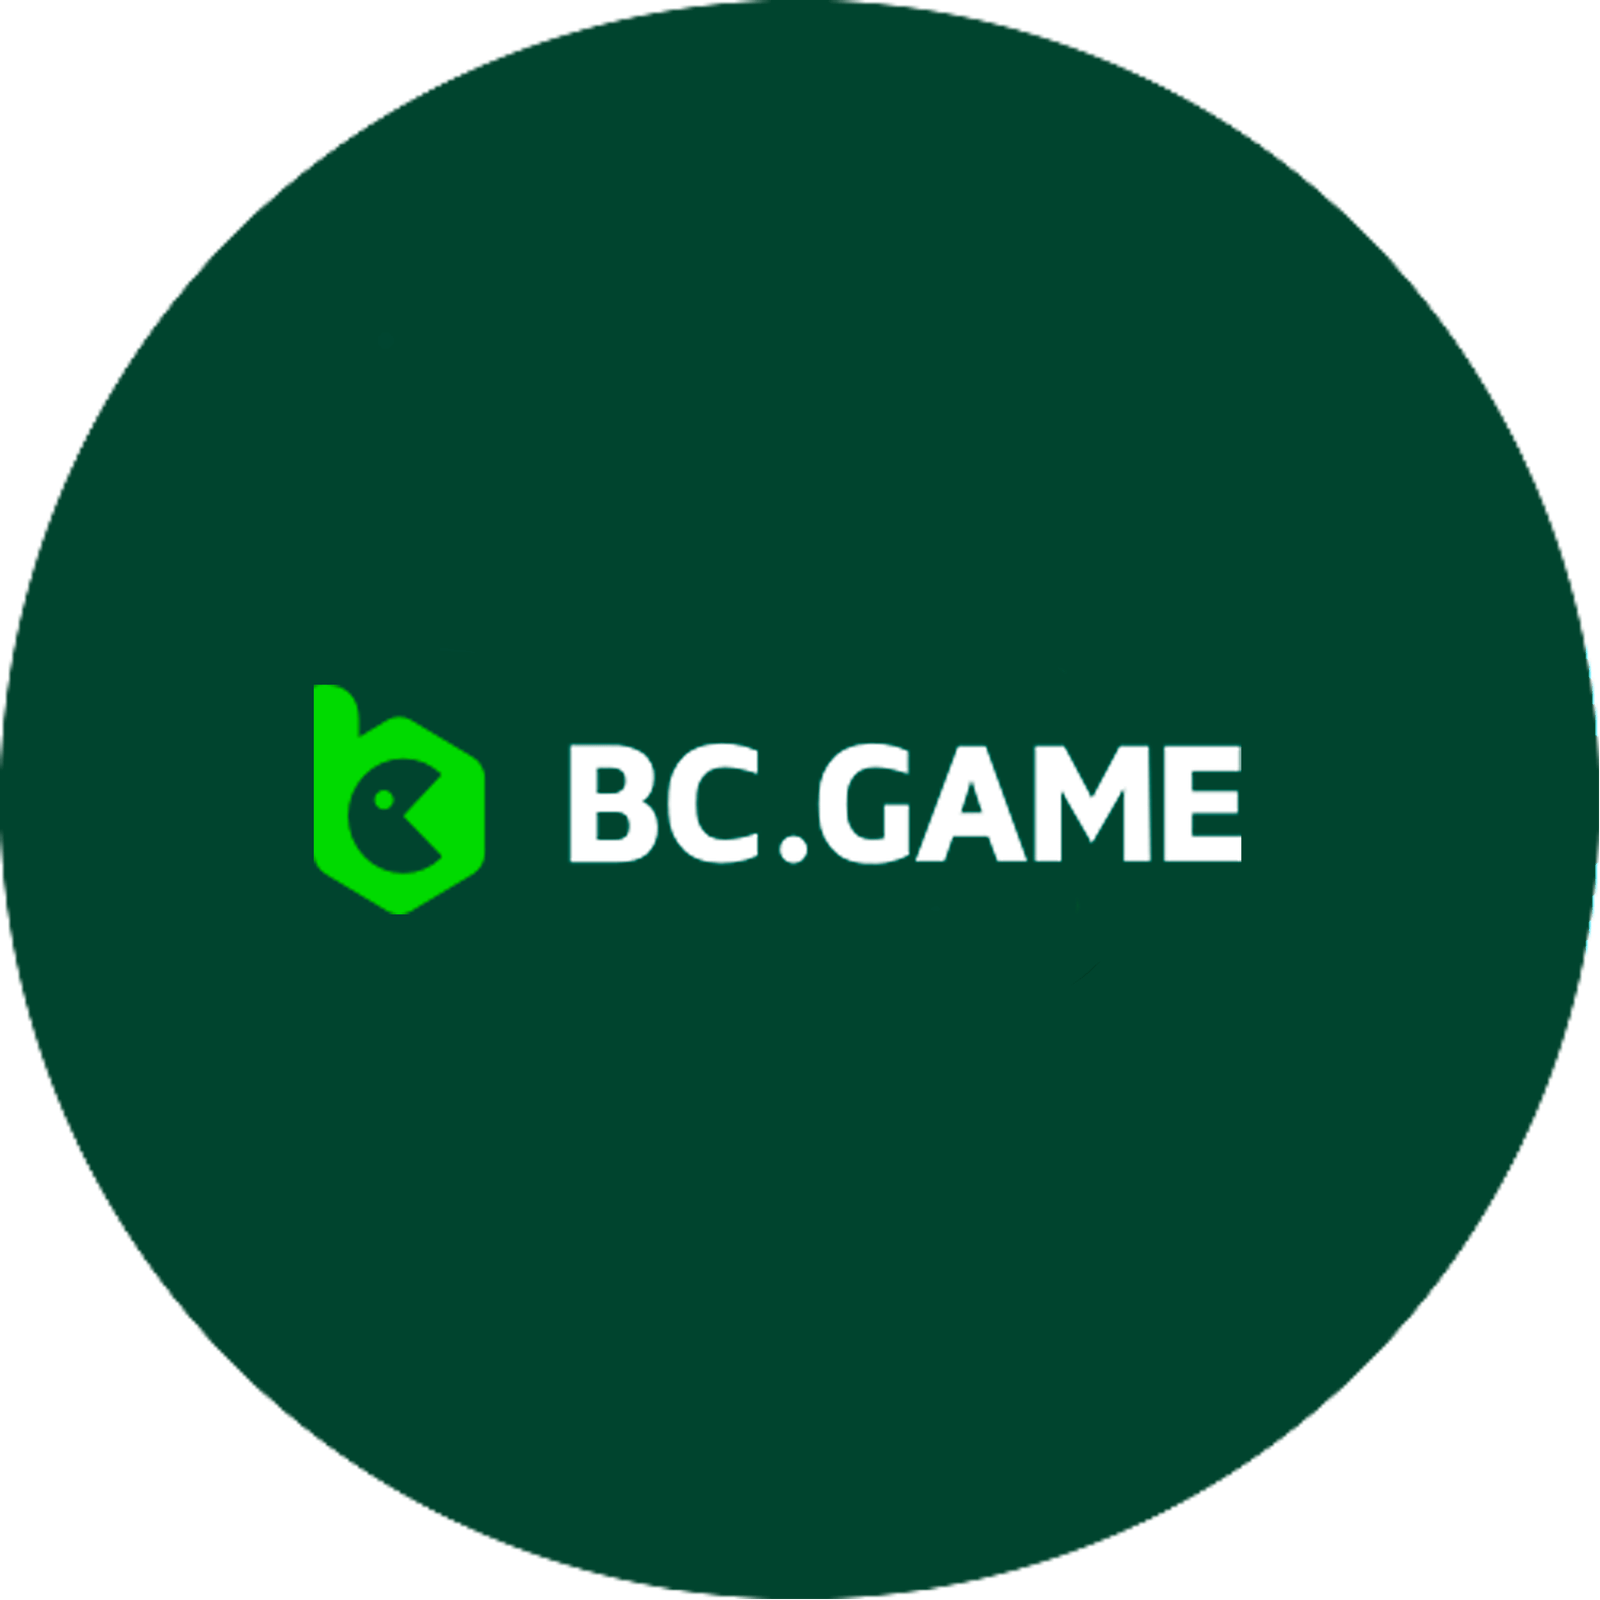 Claim 50 Free Spins at BC. Game Casino